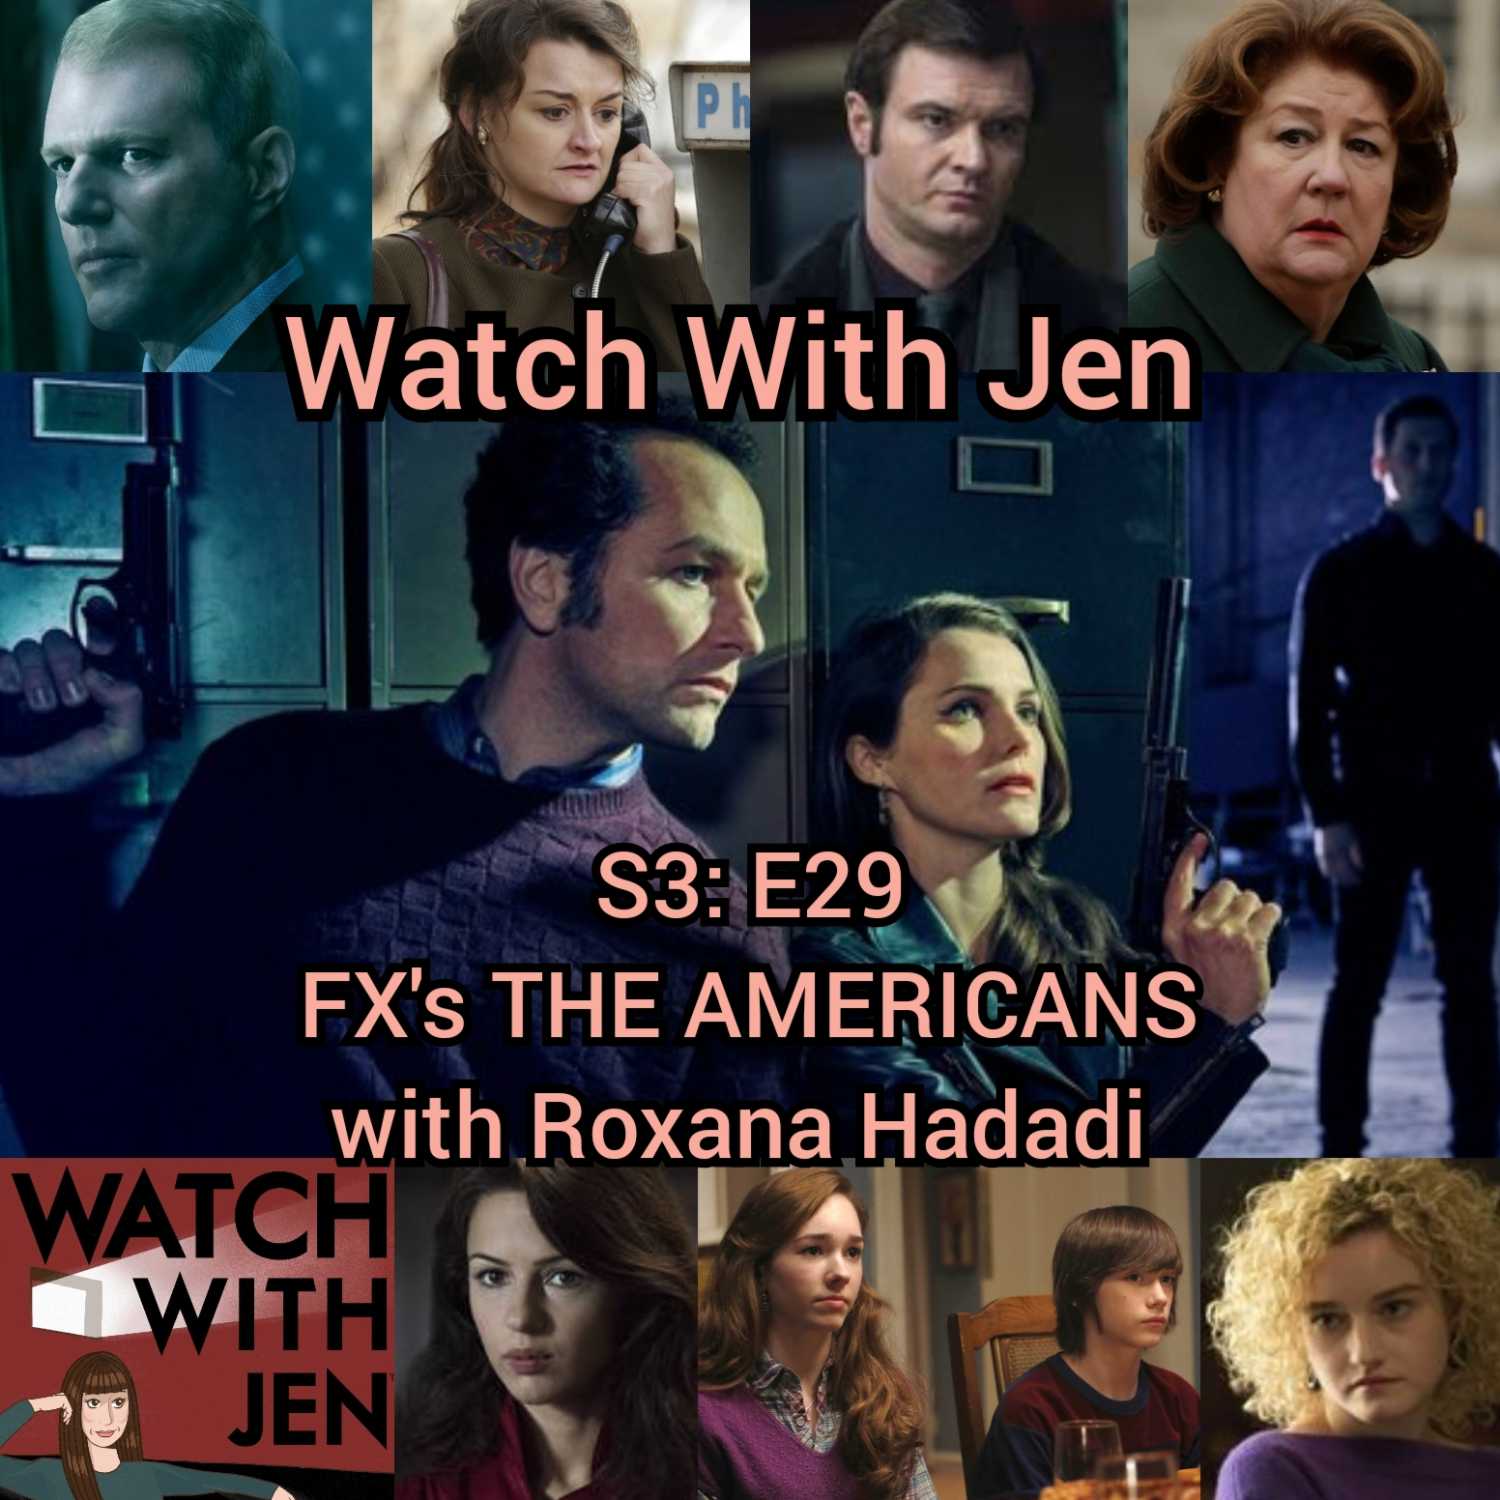 Watch With Jen - S3: E29 - FX's THE AMERICANS with Roxana Hadadi